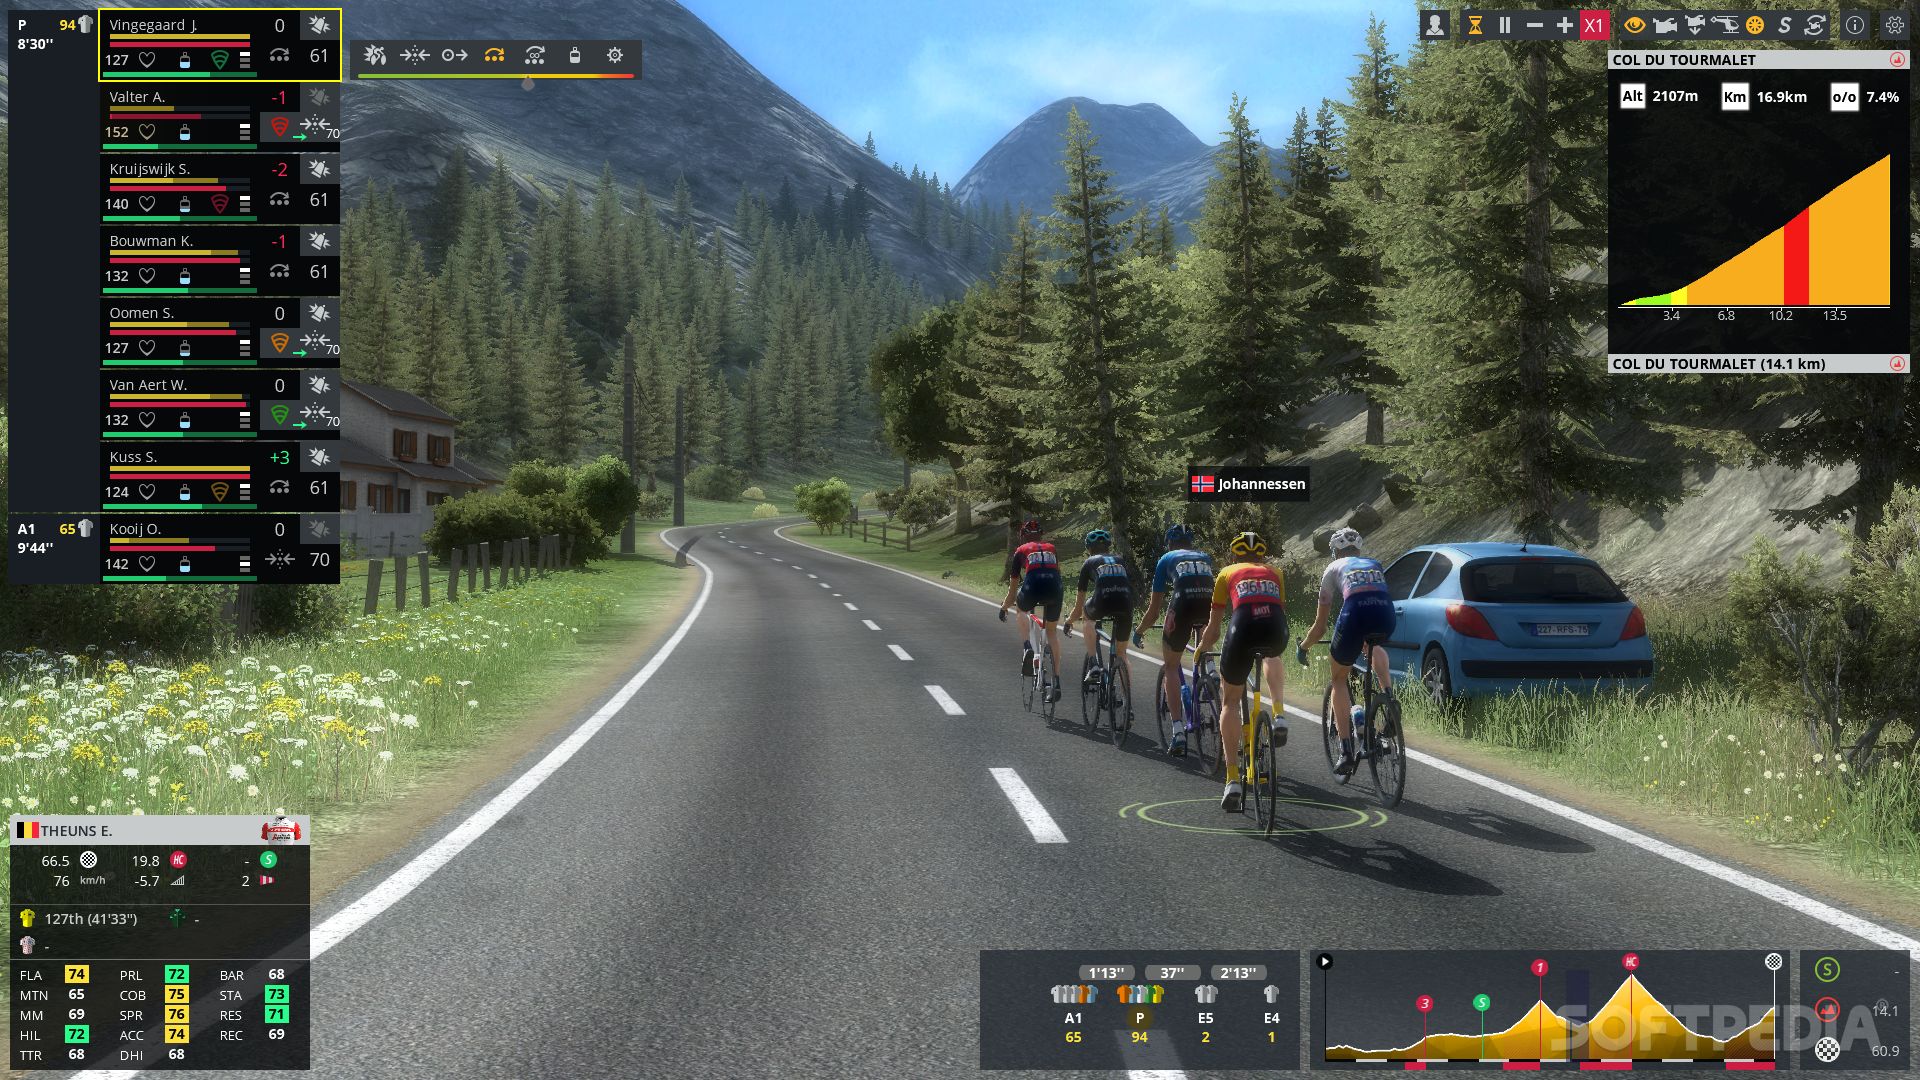 Pro Cycling Manager 2023 review - handling the race with Swiss watch  precision — GAMINGTREND